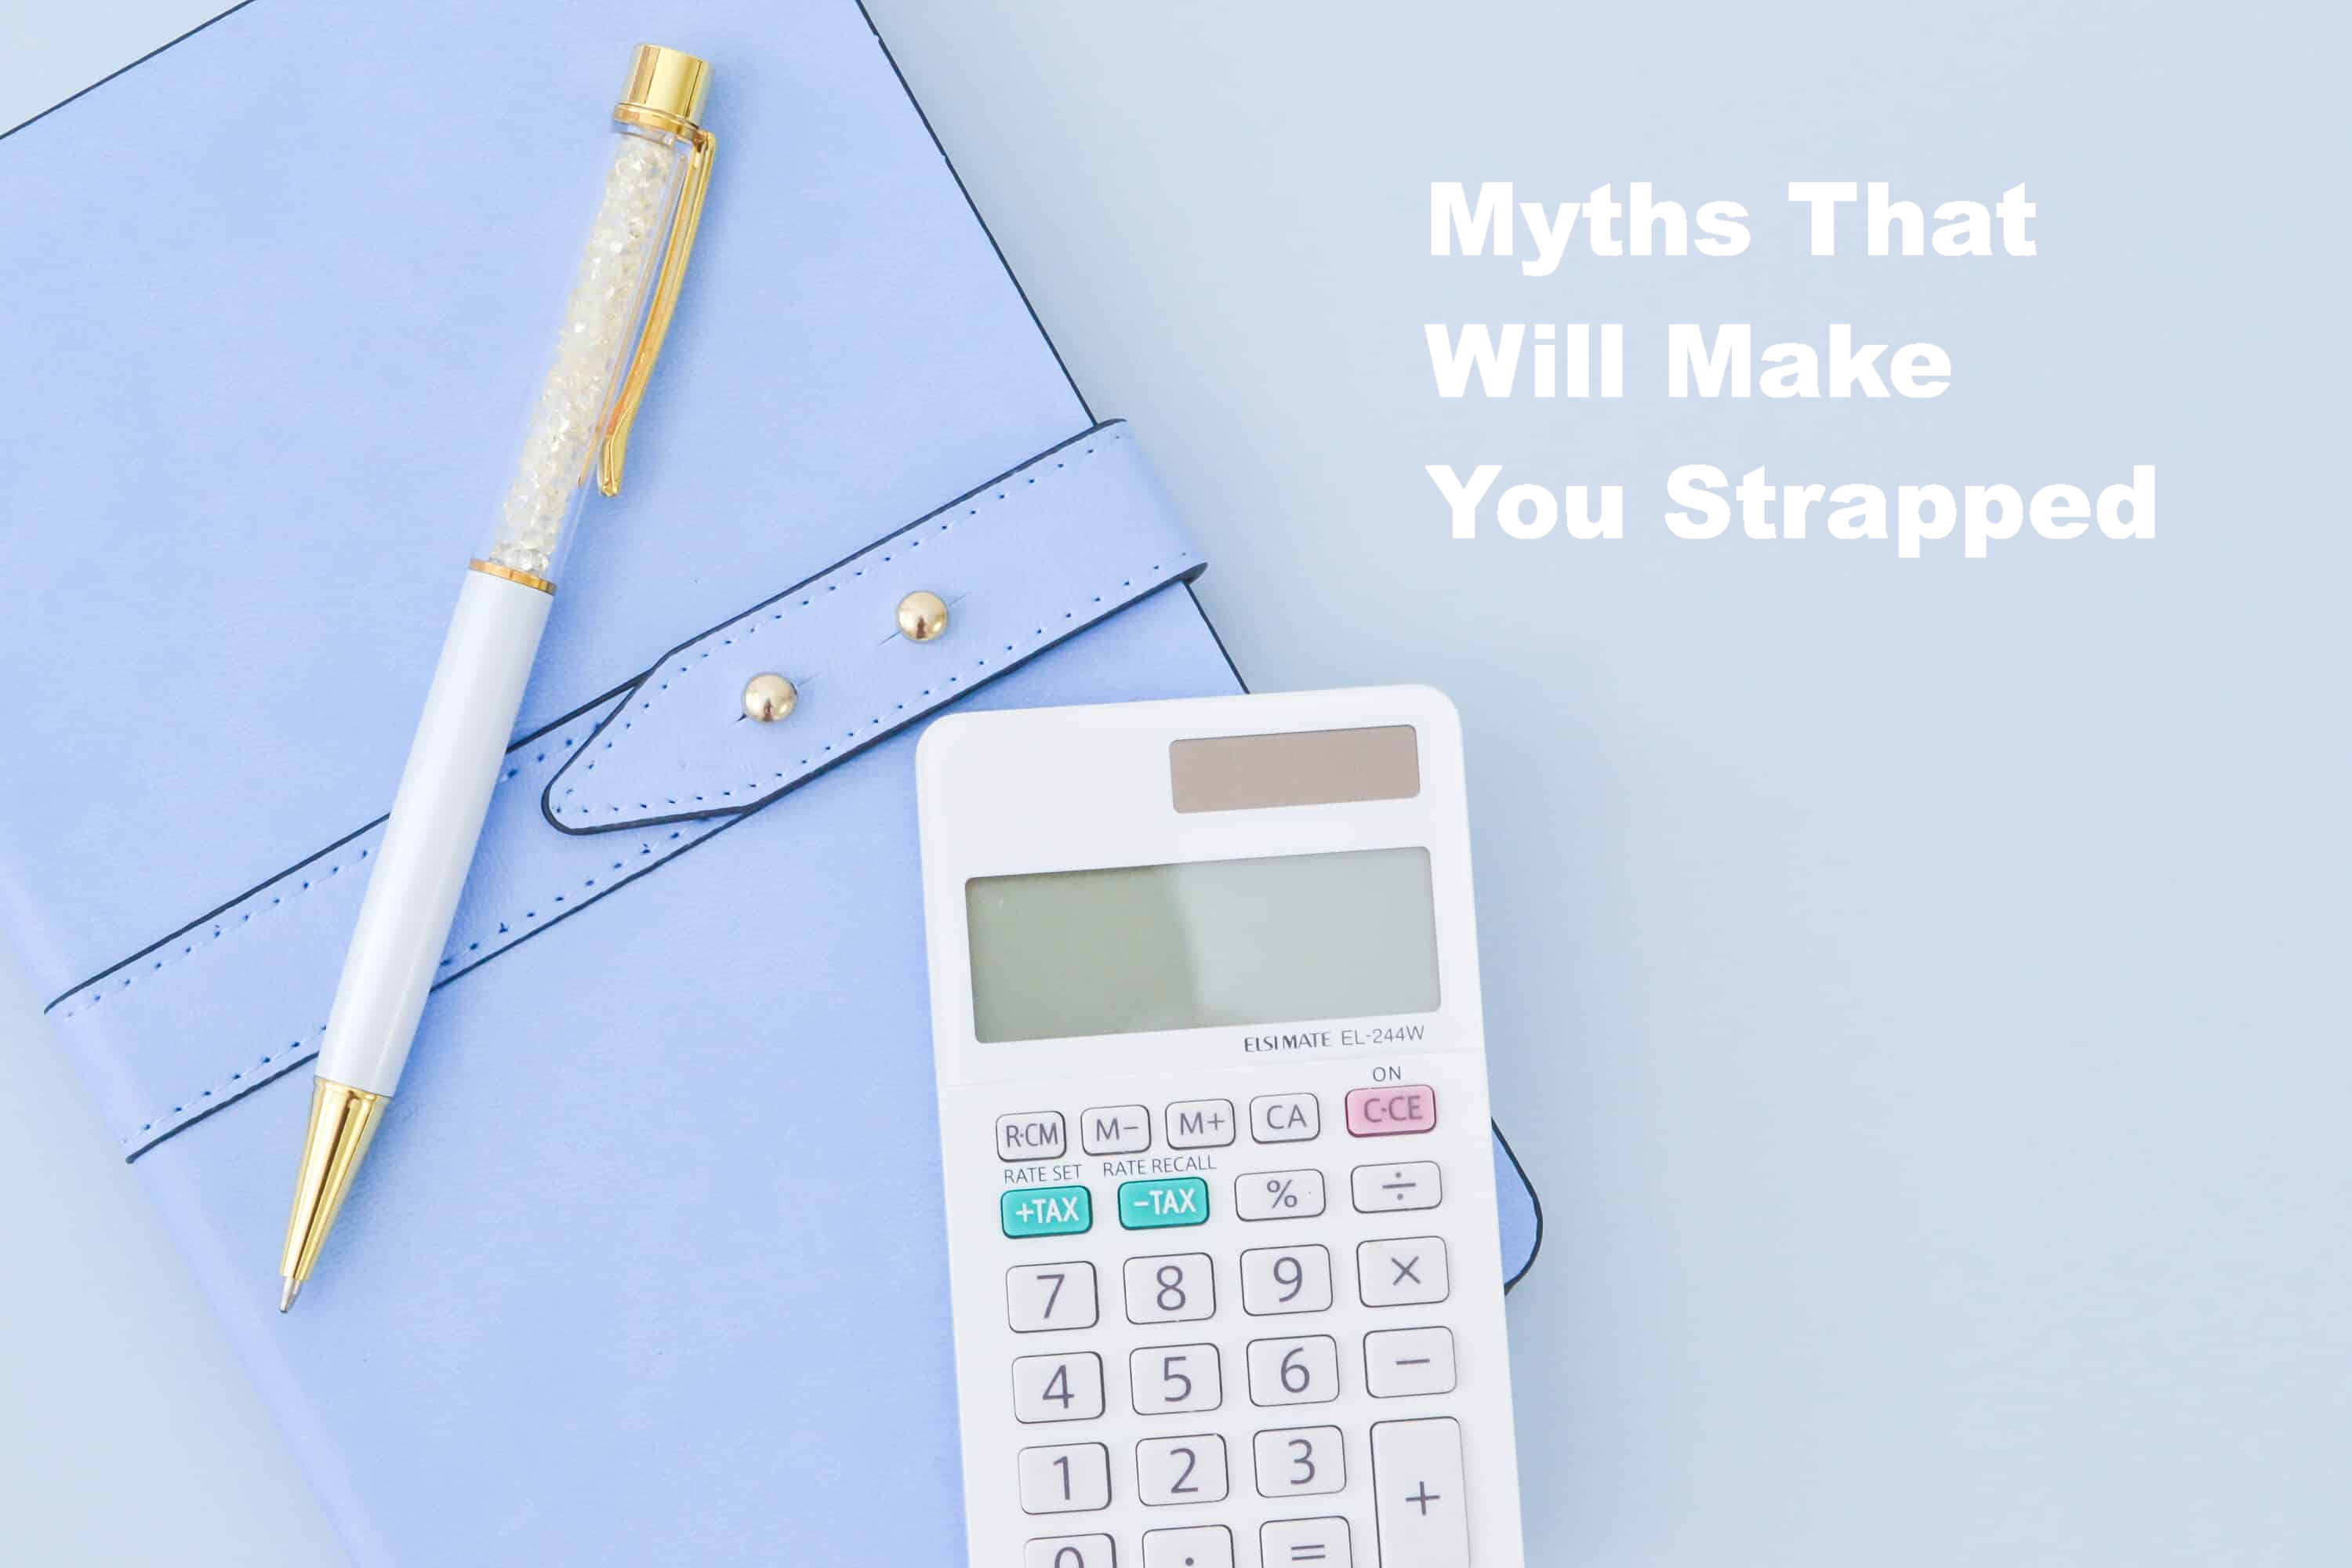 Myths That Will Make You Strapped